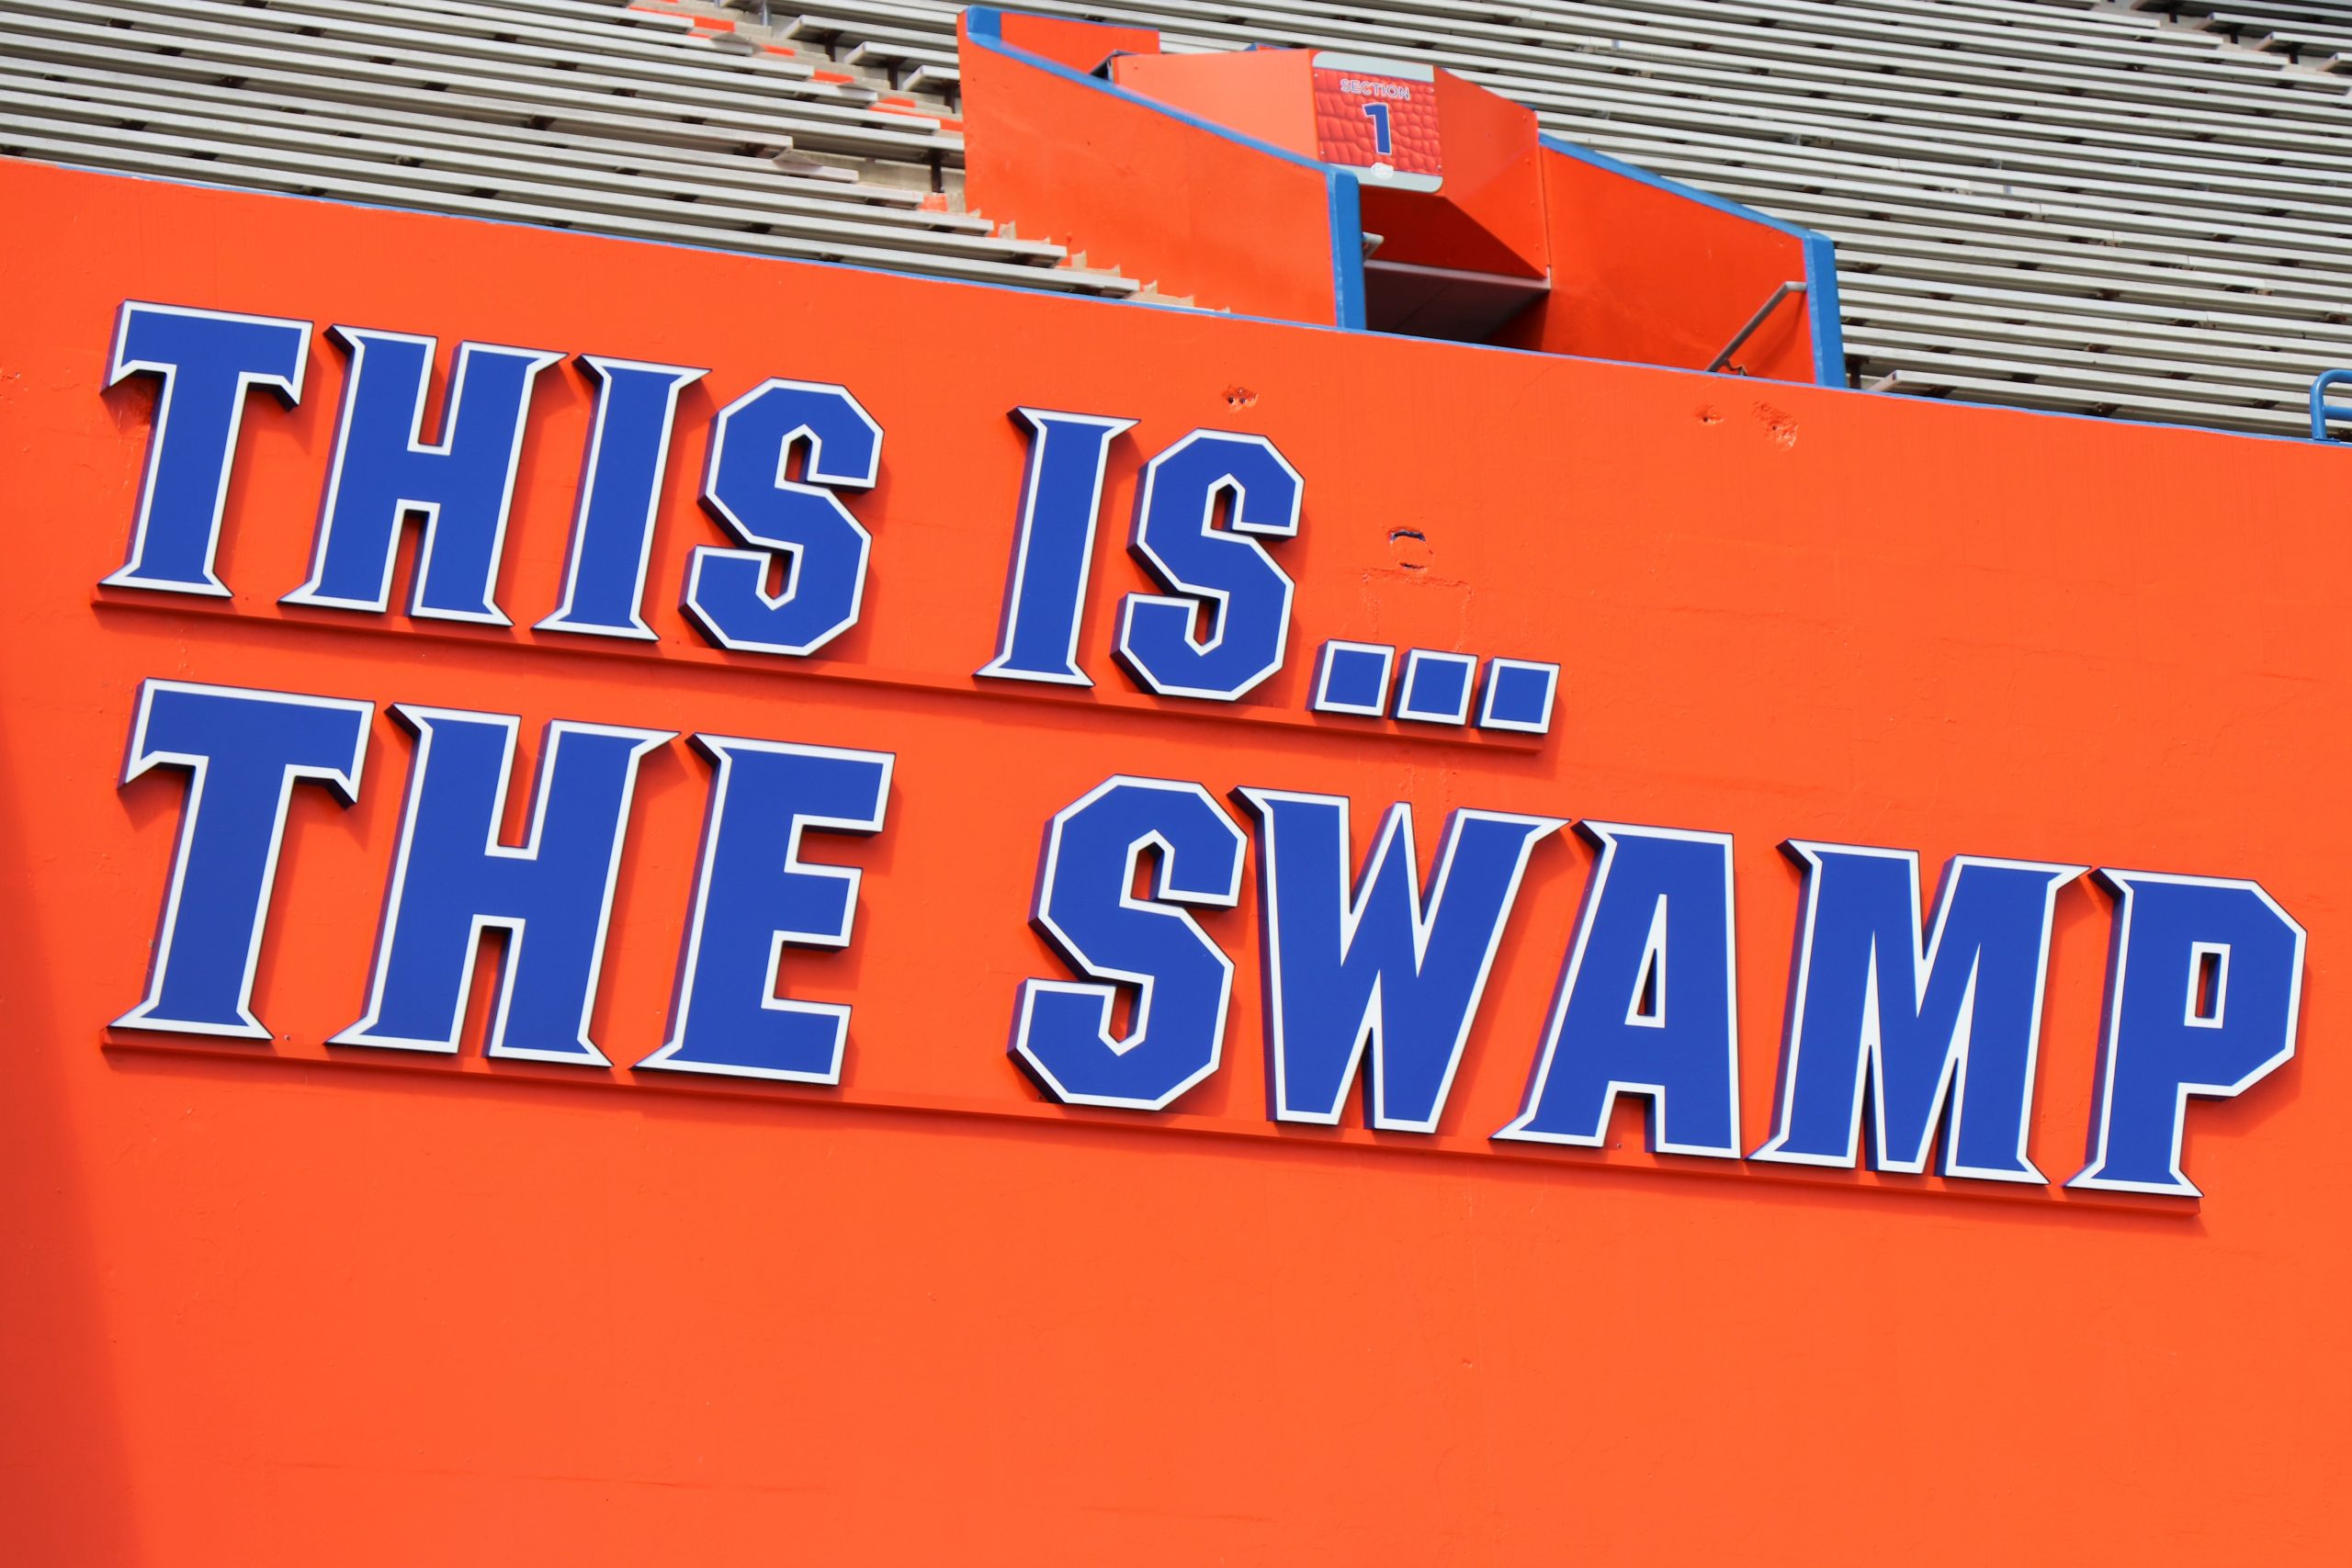 The Swamp is getting a makeover, a significant overhaul that’s expected to cost at least $400 million